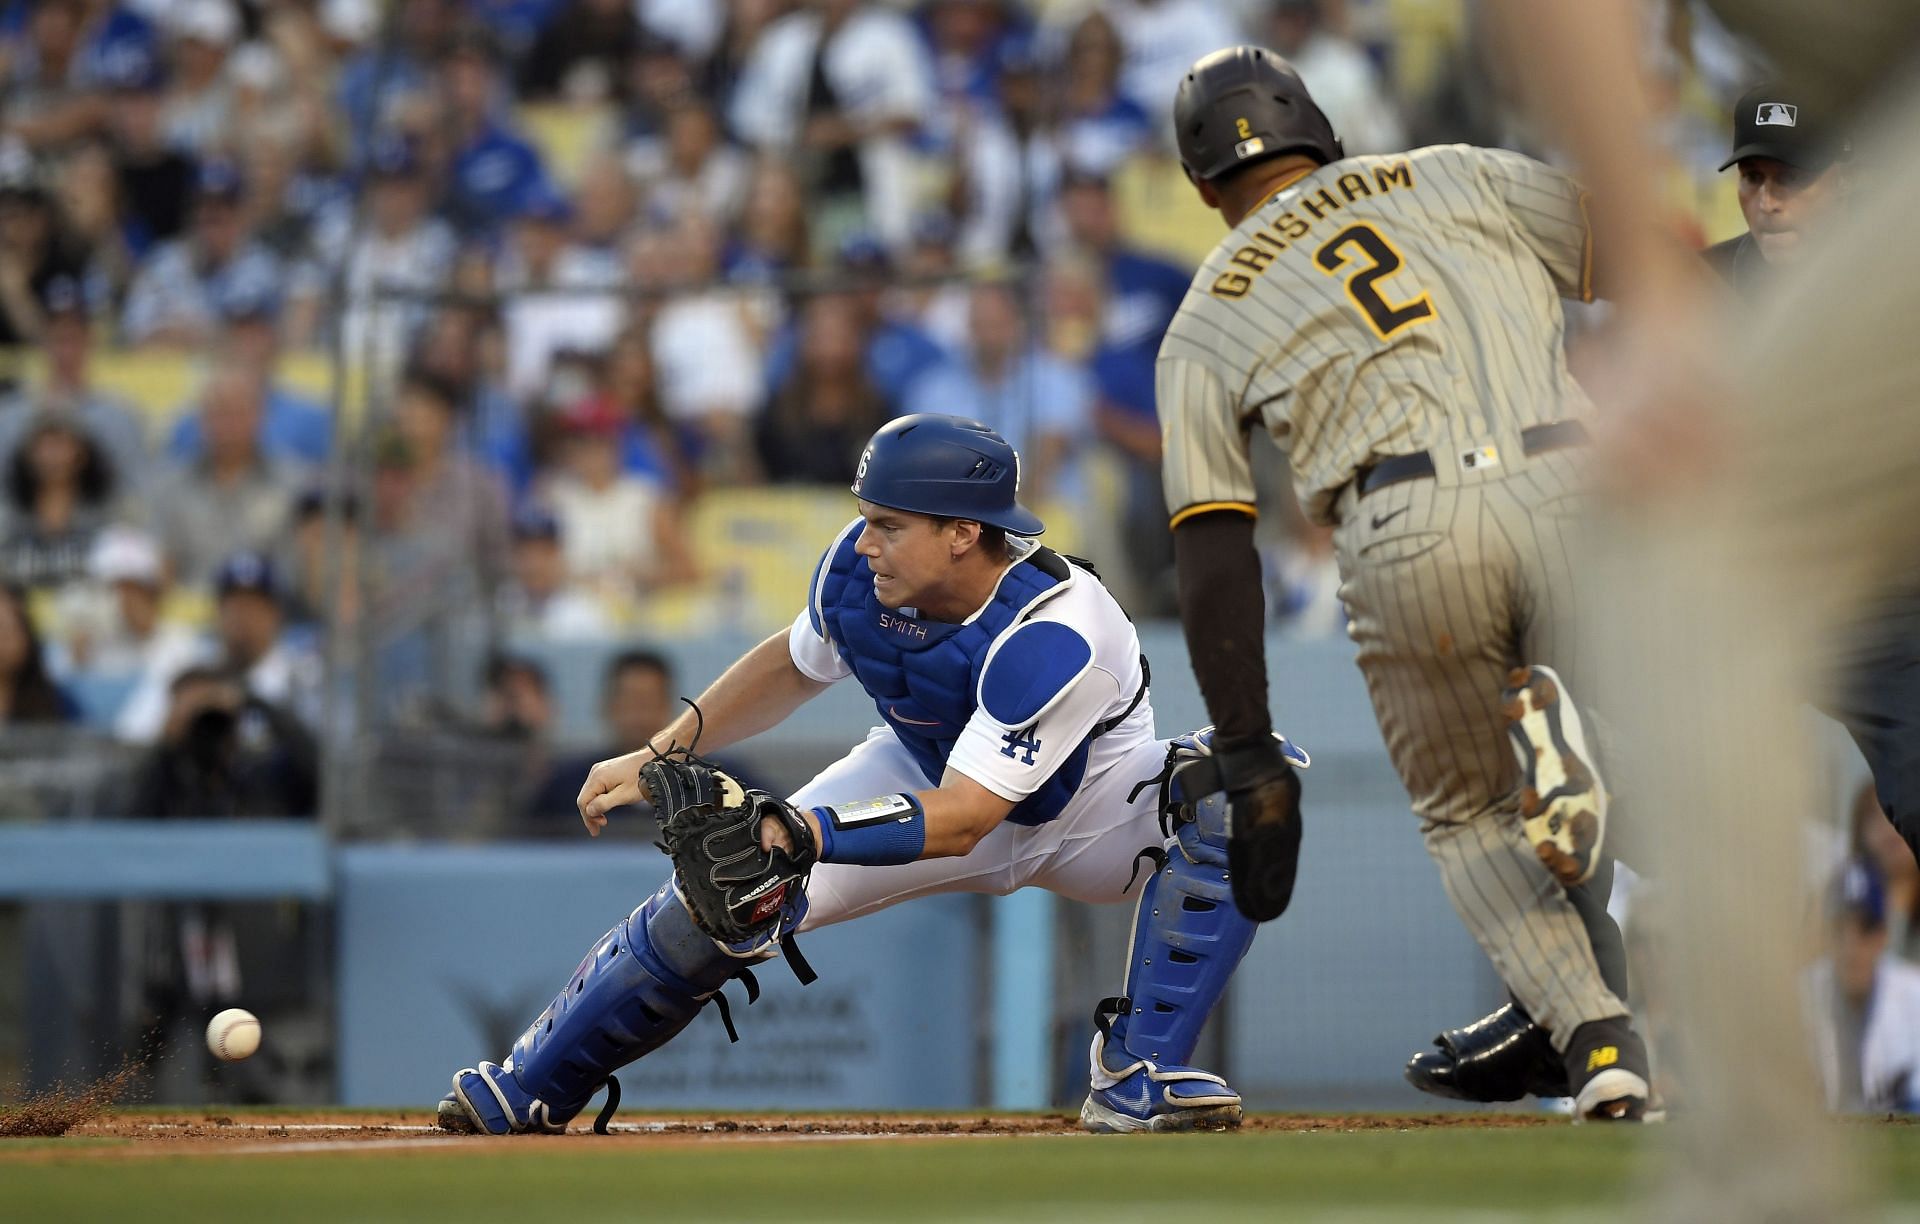 Los Angeles Dodgers Catcher Will Smith takes a throw from right fielder Chris Taylor to tag out Trent Grisham of the San Diego Padres.